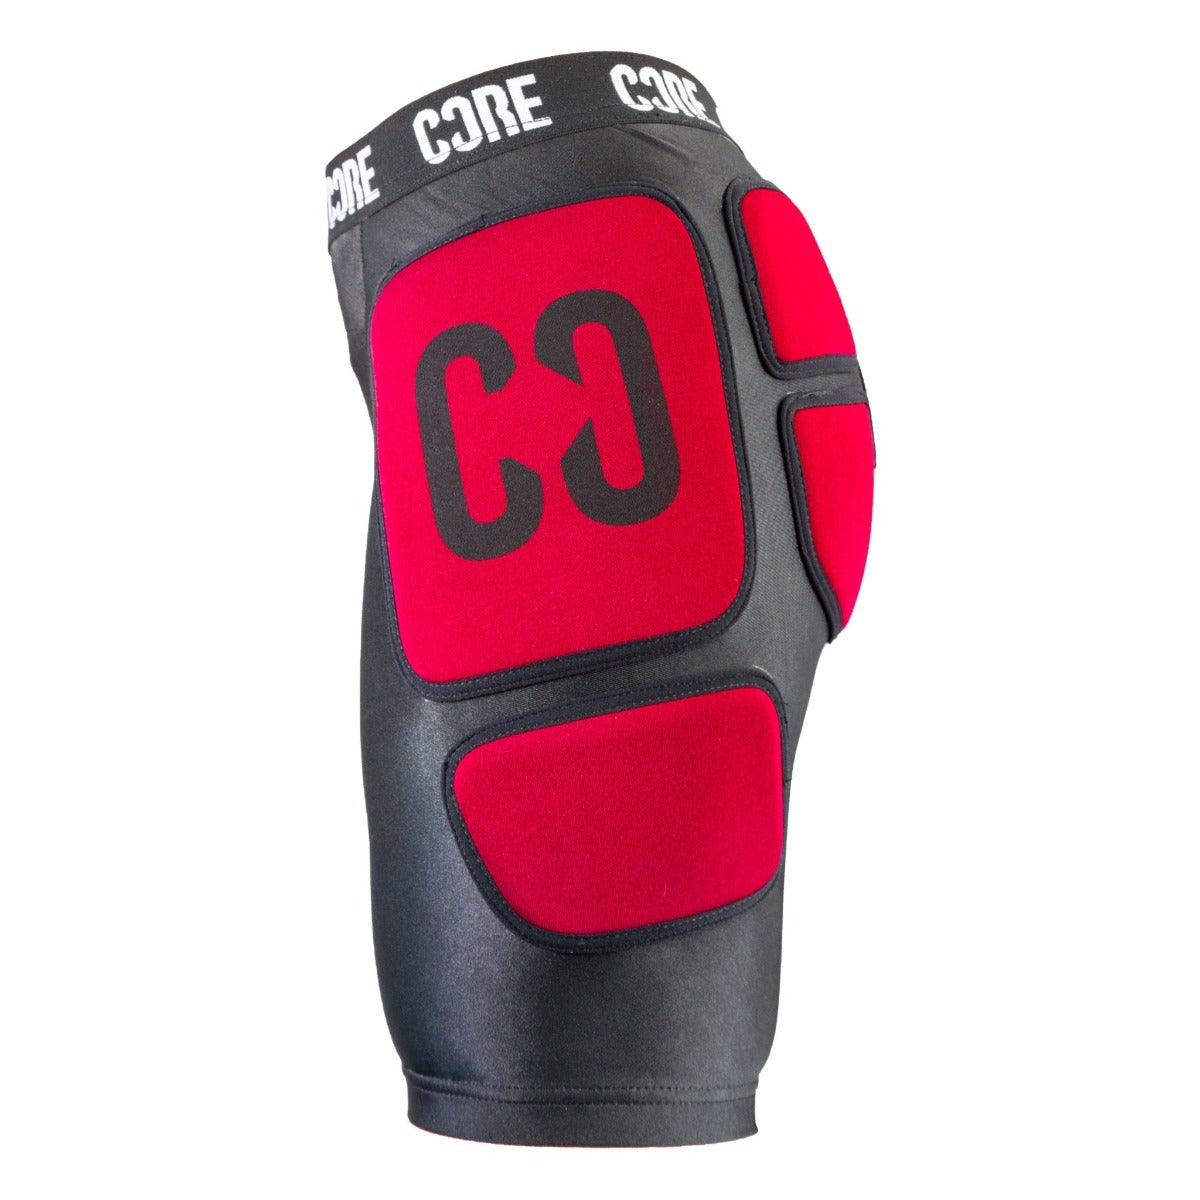 CORE Stealth Impact Padded Skate Protection Shorts - Side